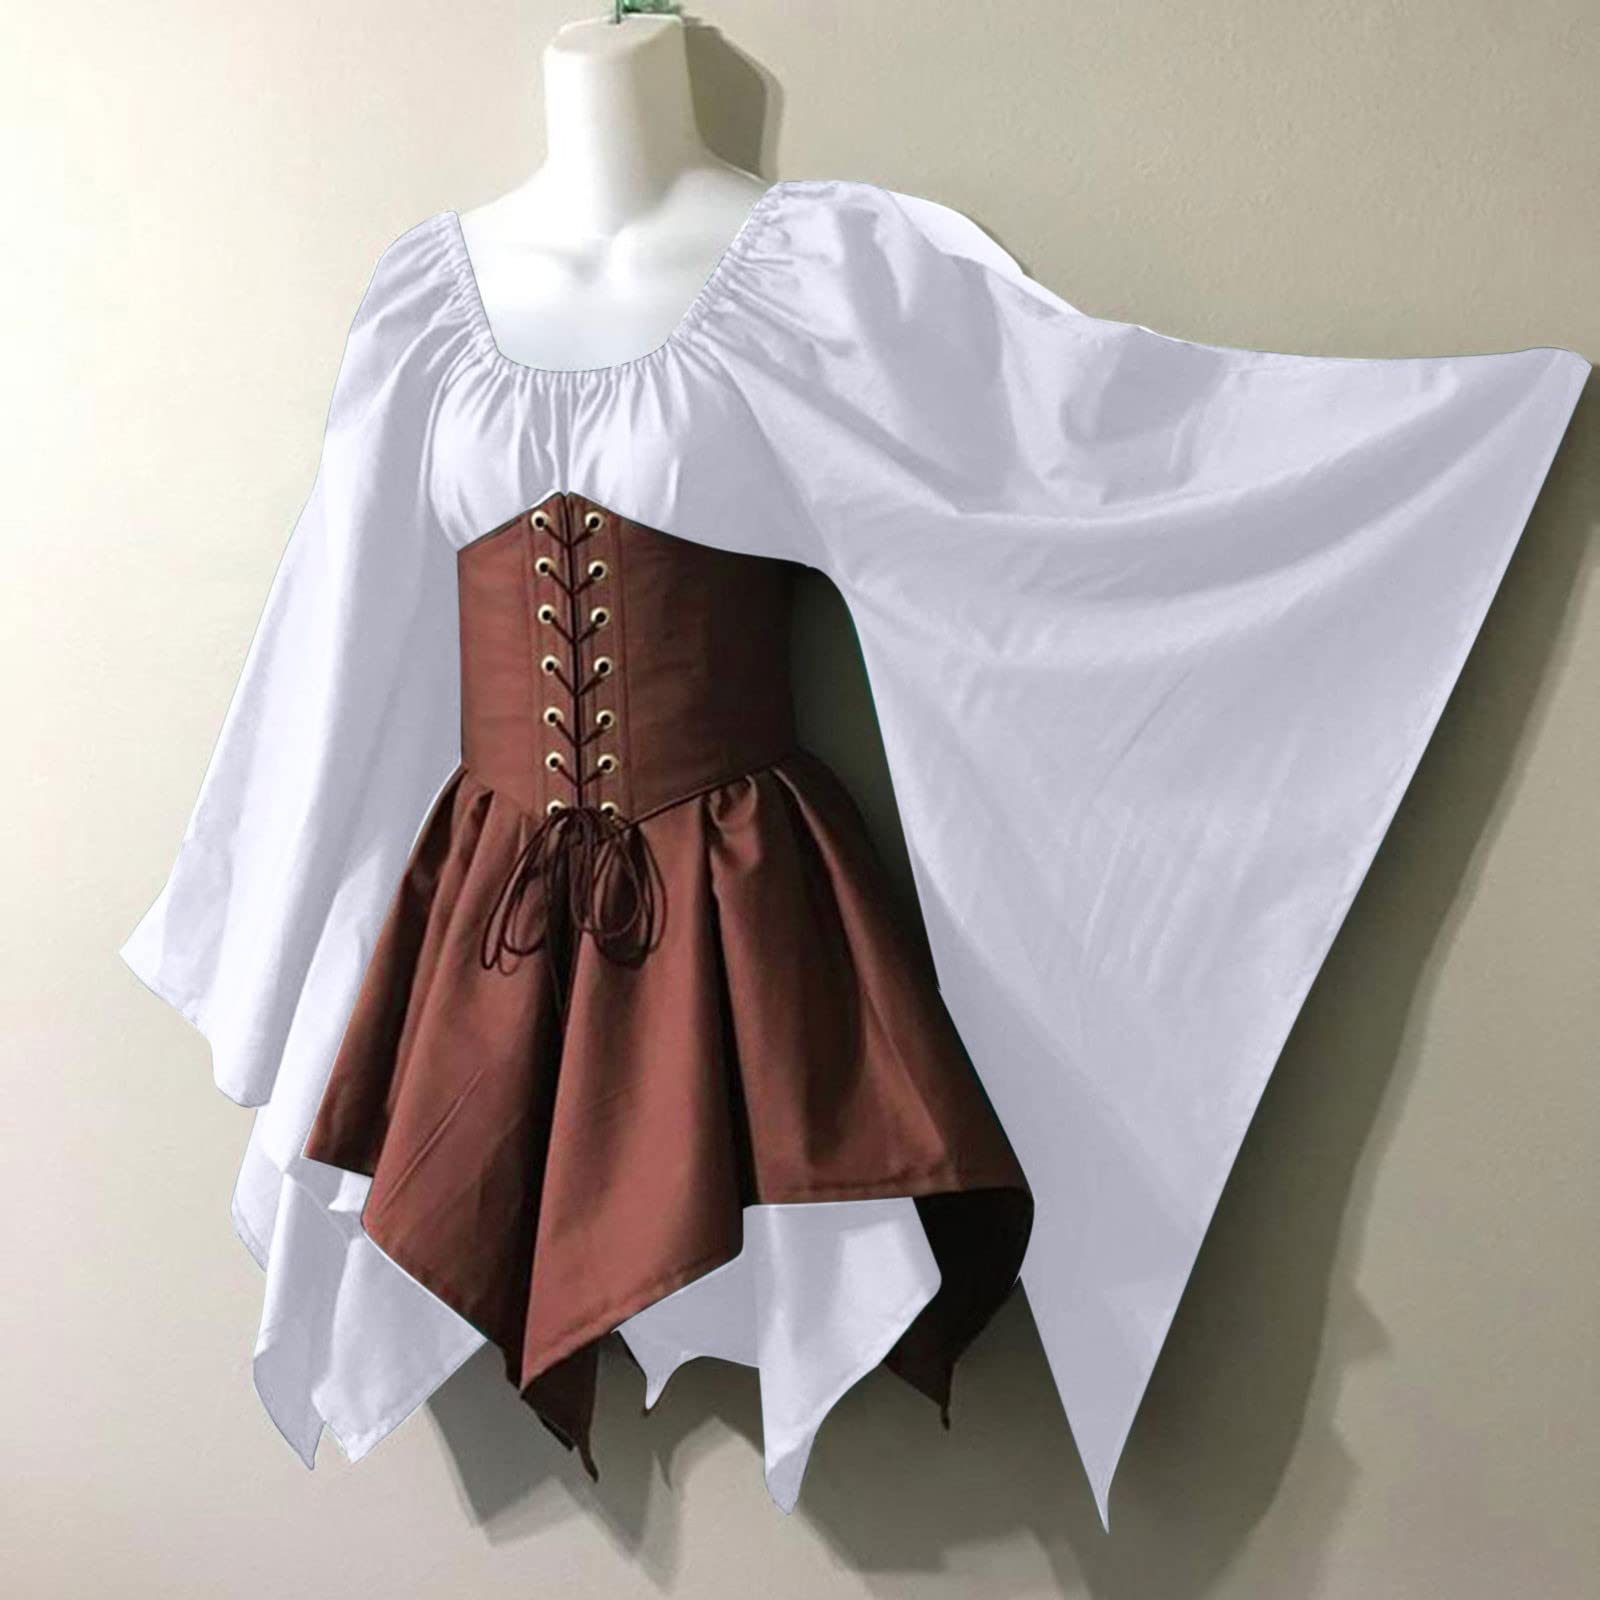  Medieval Renaissant Vintage Color Dress Women with Corset  Victorian Ball Gowns Costume Vintage Irish Long Dress[Brown-White,3XL] :  Clothing, Shoes & Jewelry